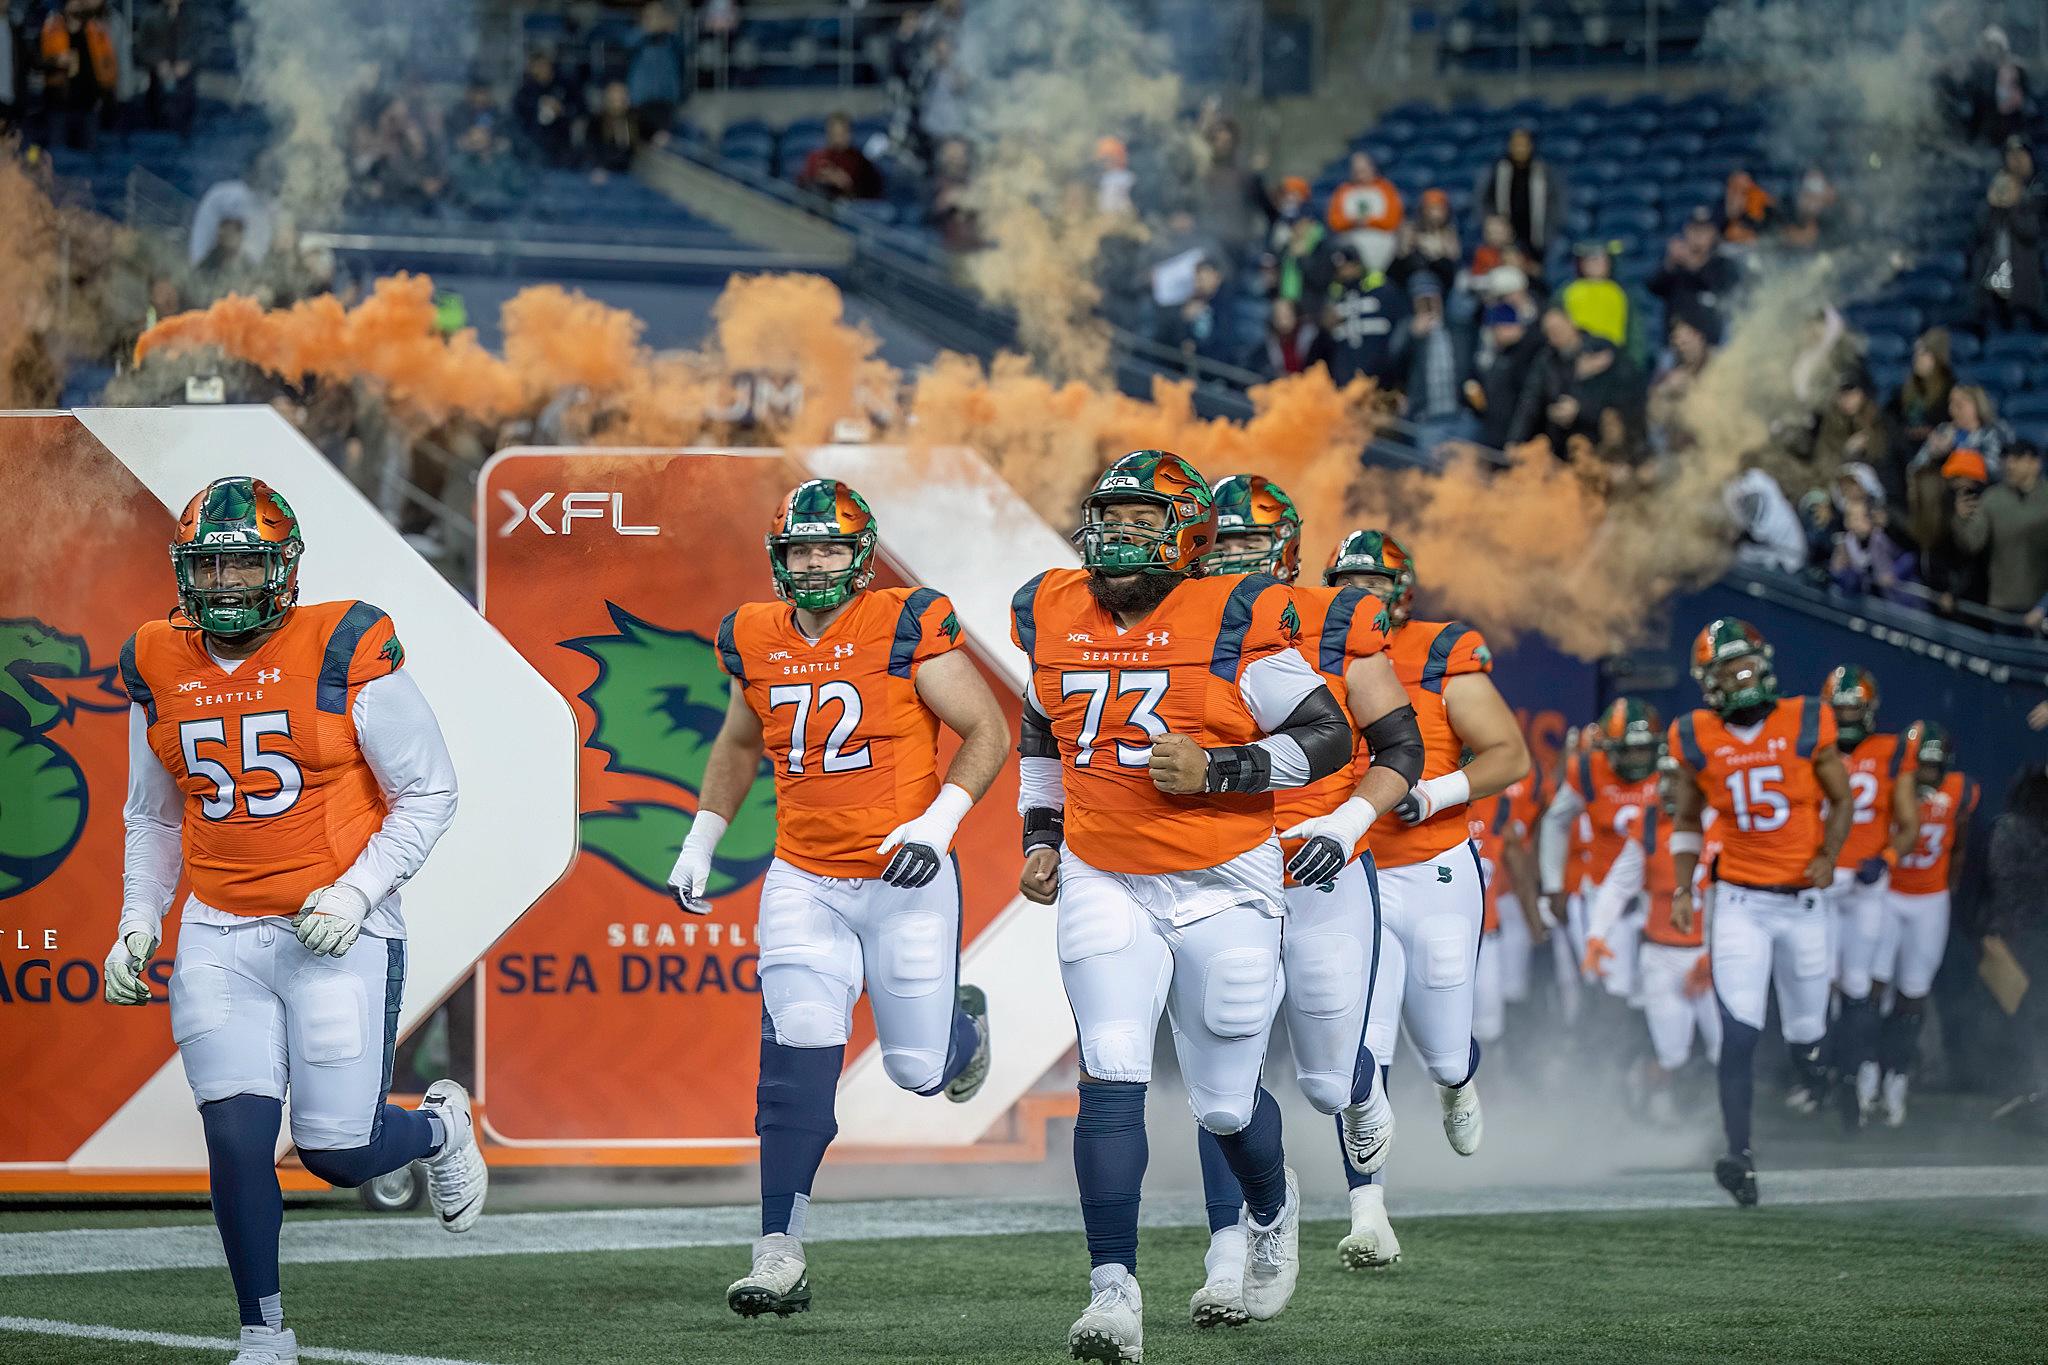 Extra fun: Sea Dragons bring excitment to Seattle, XFL, Sports